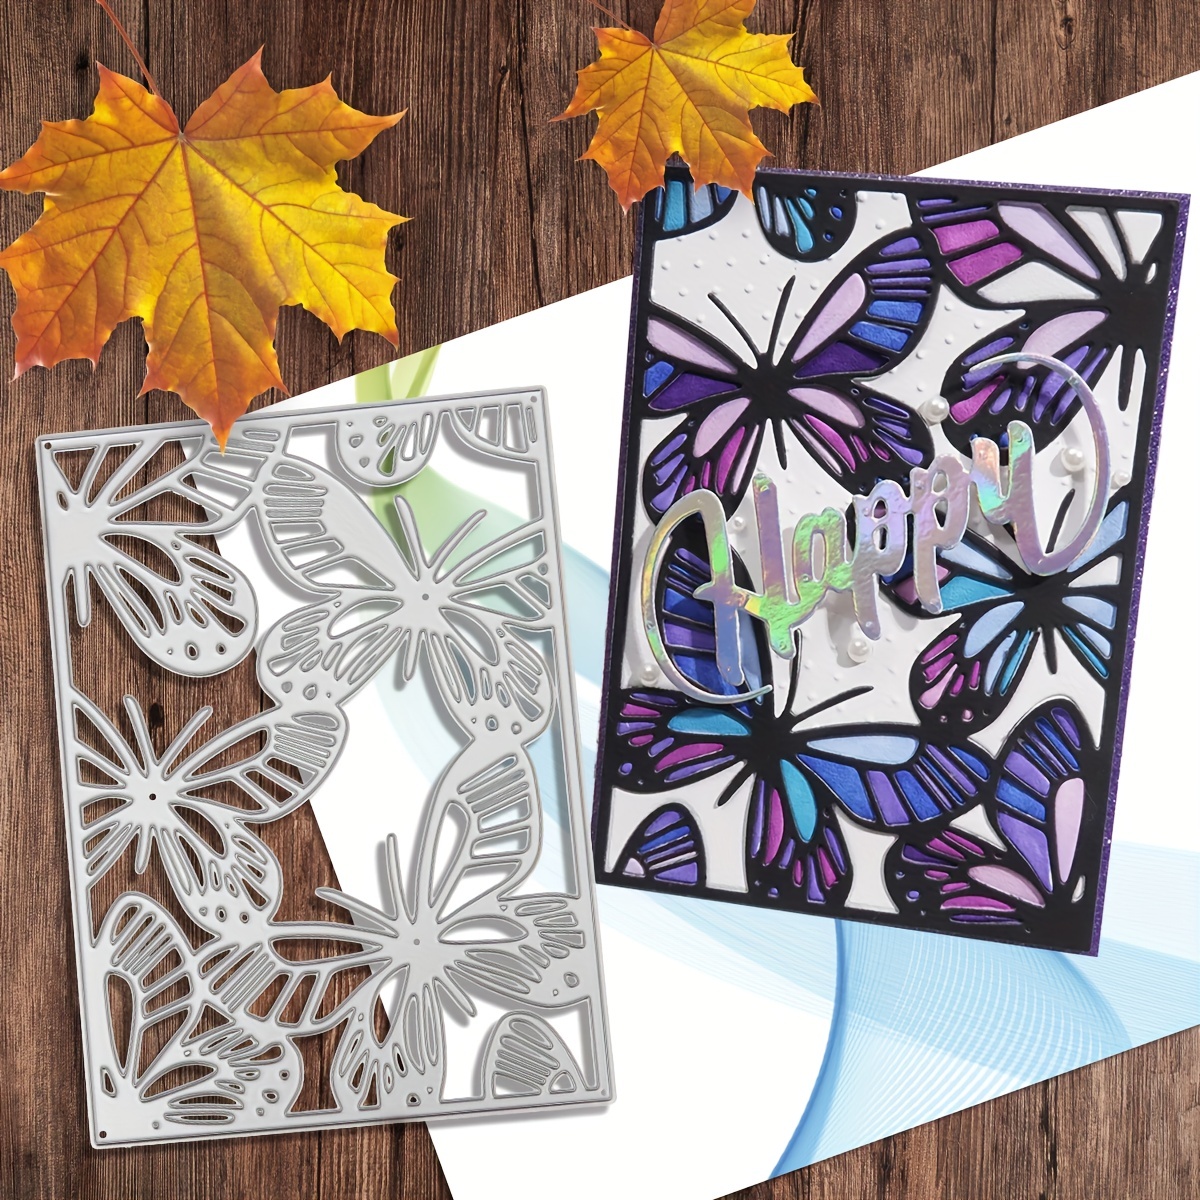 'Butterfly Die Cut for Crafting with Metal Cutting Dies'